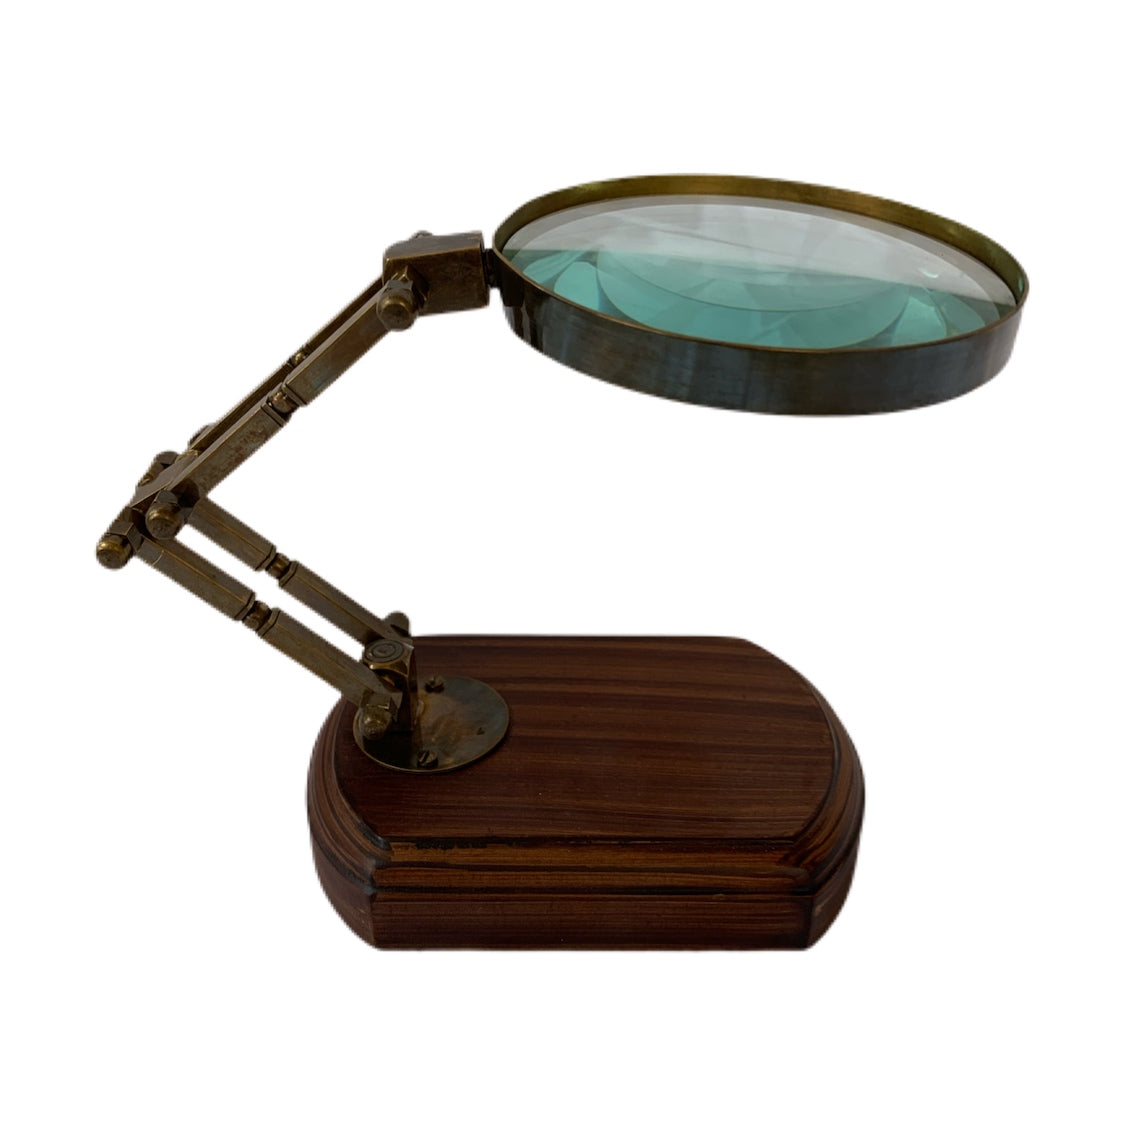 Table magnifier